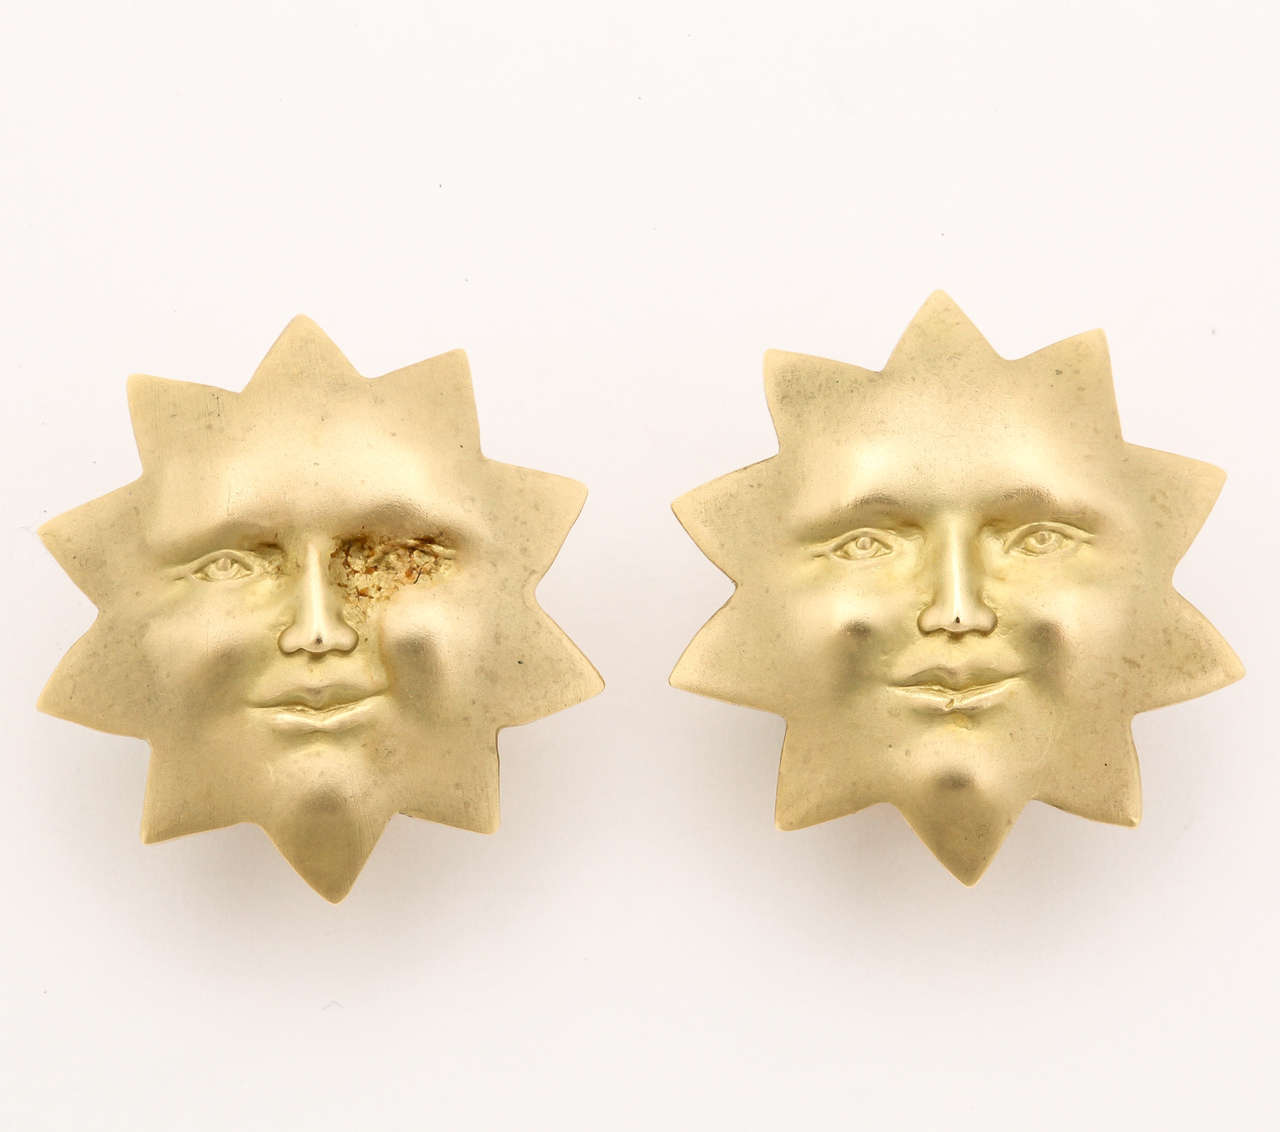 These 18 kt gold sun face earrings are made with clips. A post can be added upon request. The message sent to the receiver of these earrings is that she is your Sunshine every day of your life. Your day begins and ends with the light of your life.